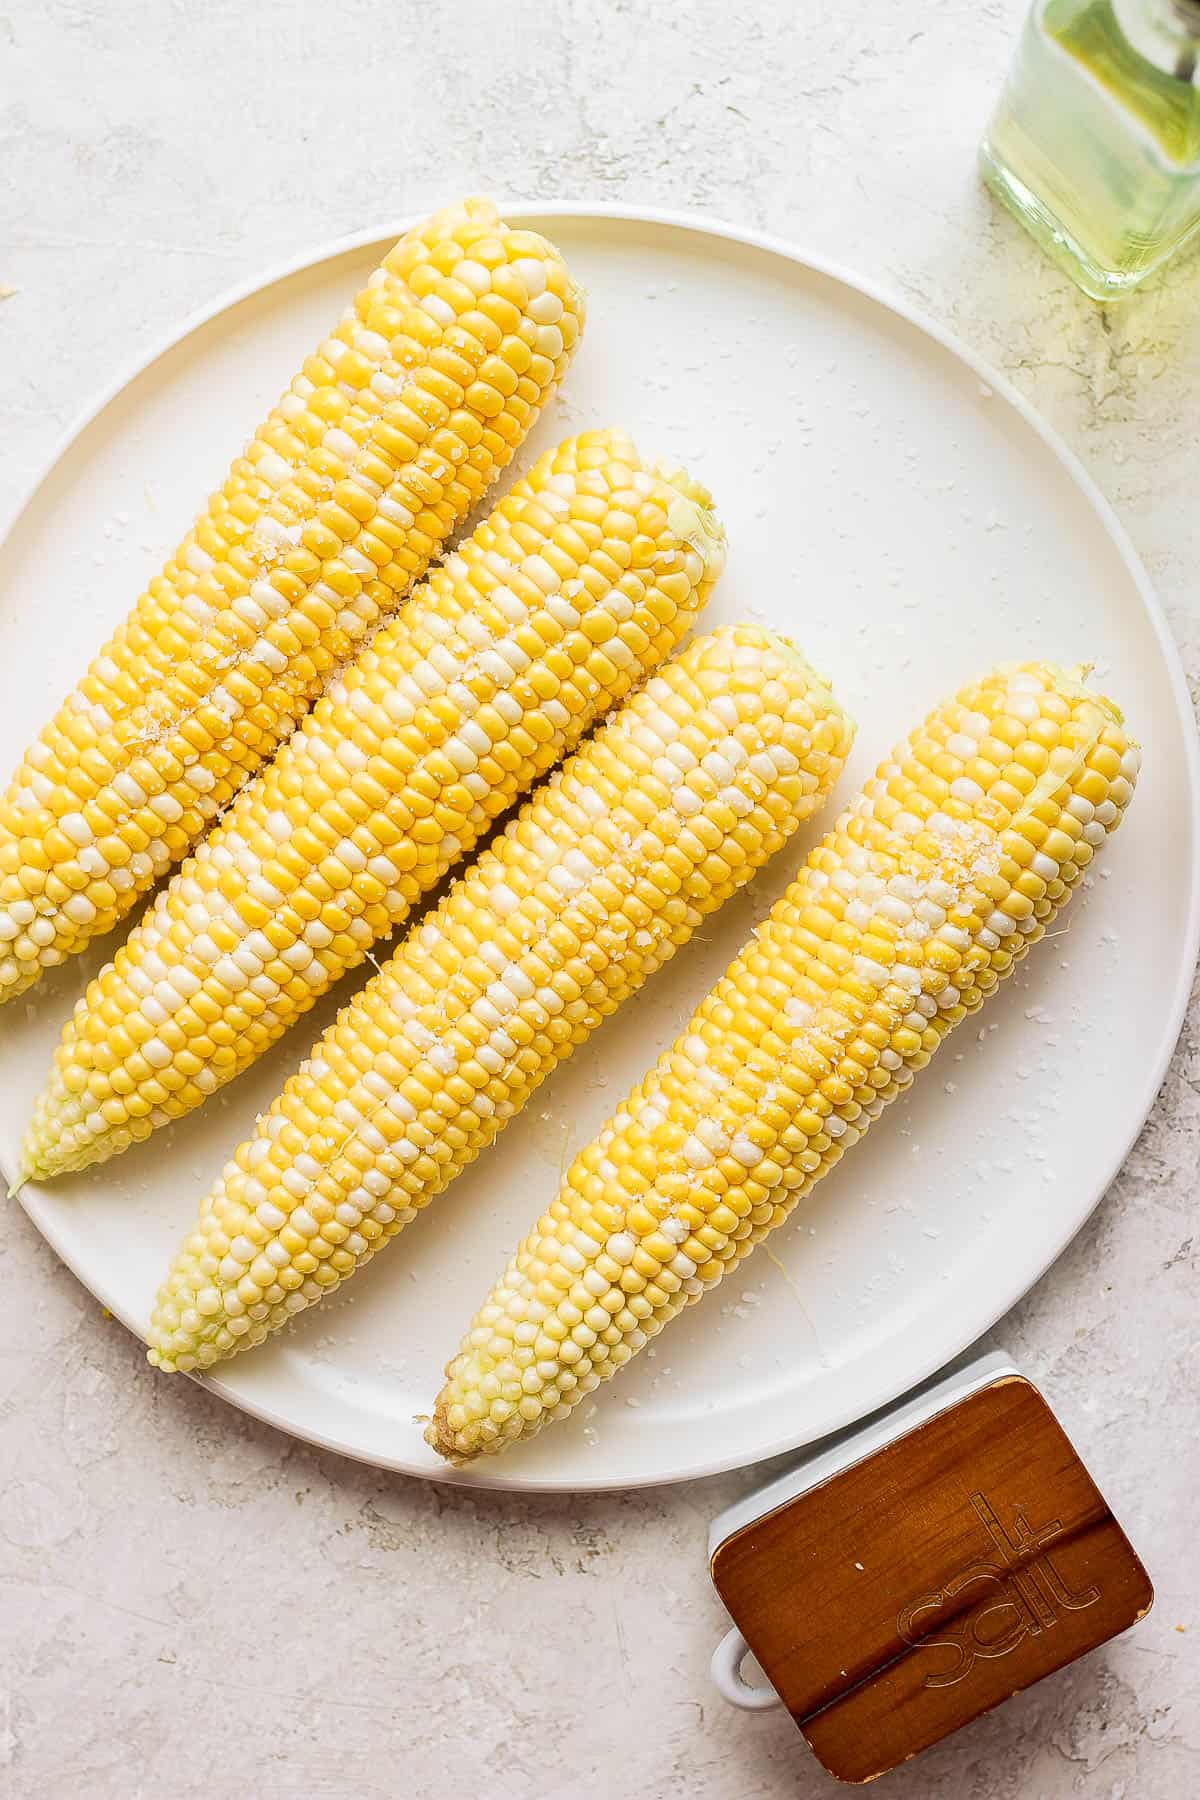 Plate of raw corn rubbed with oil and salt on top. 